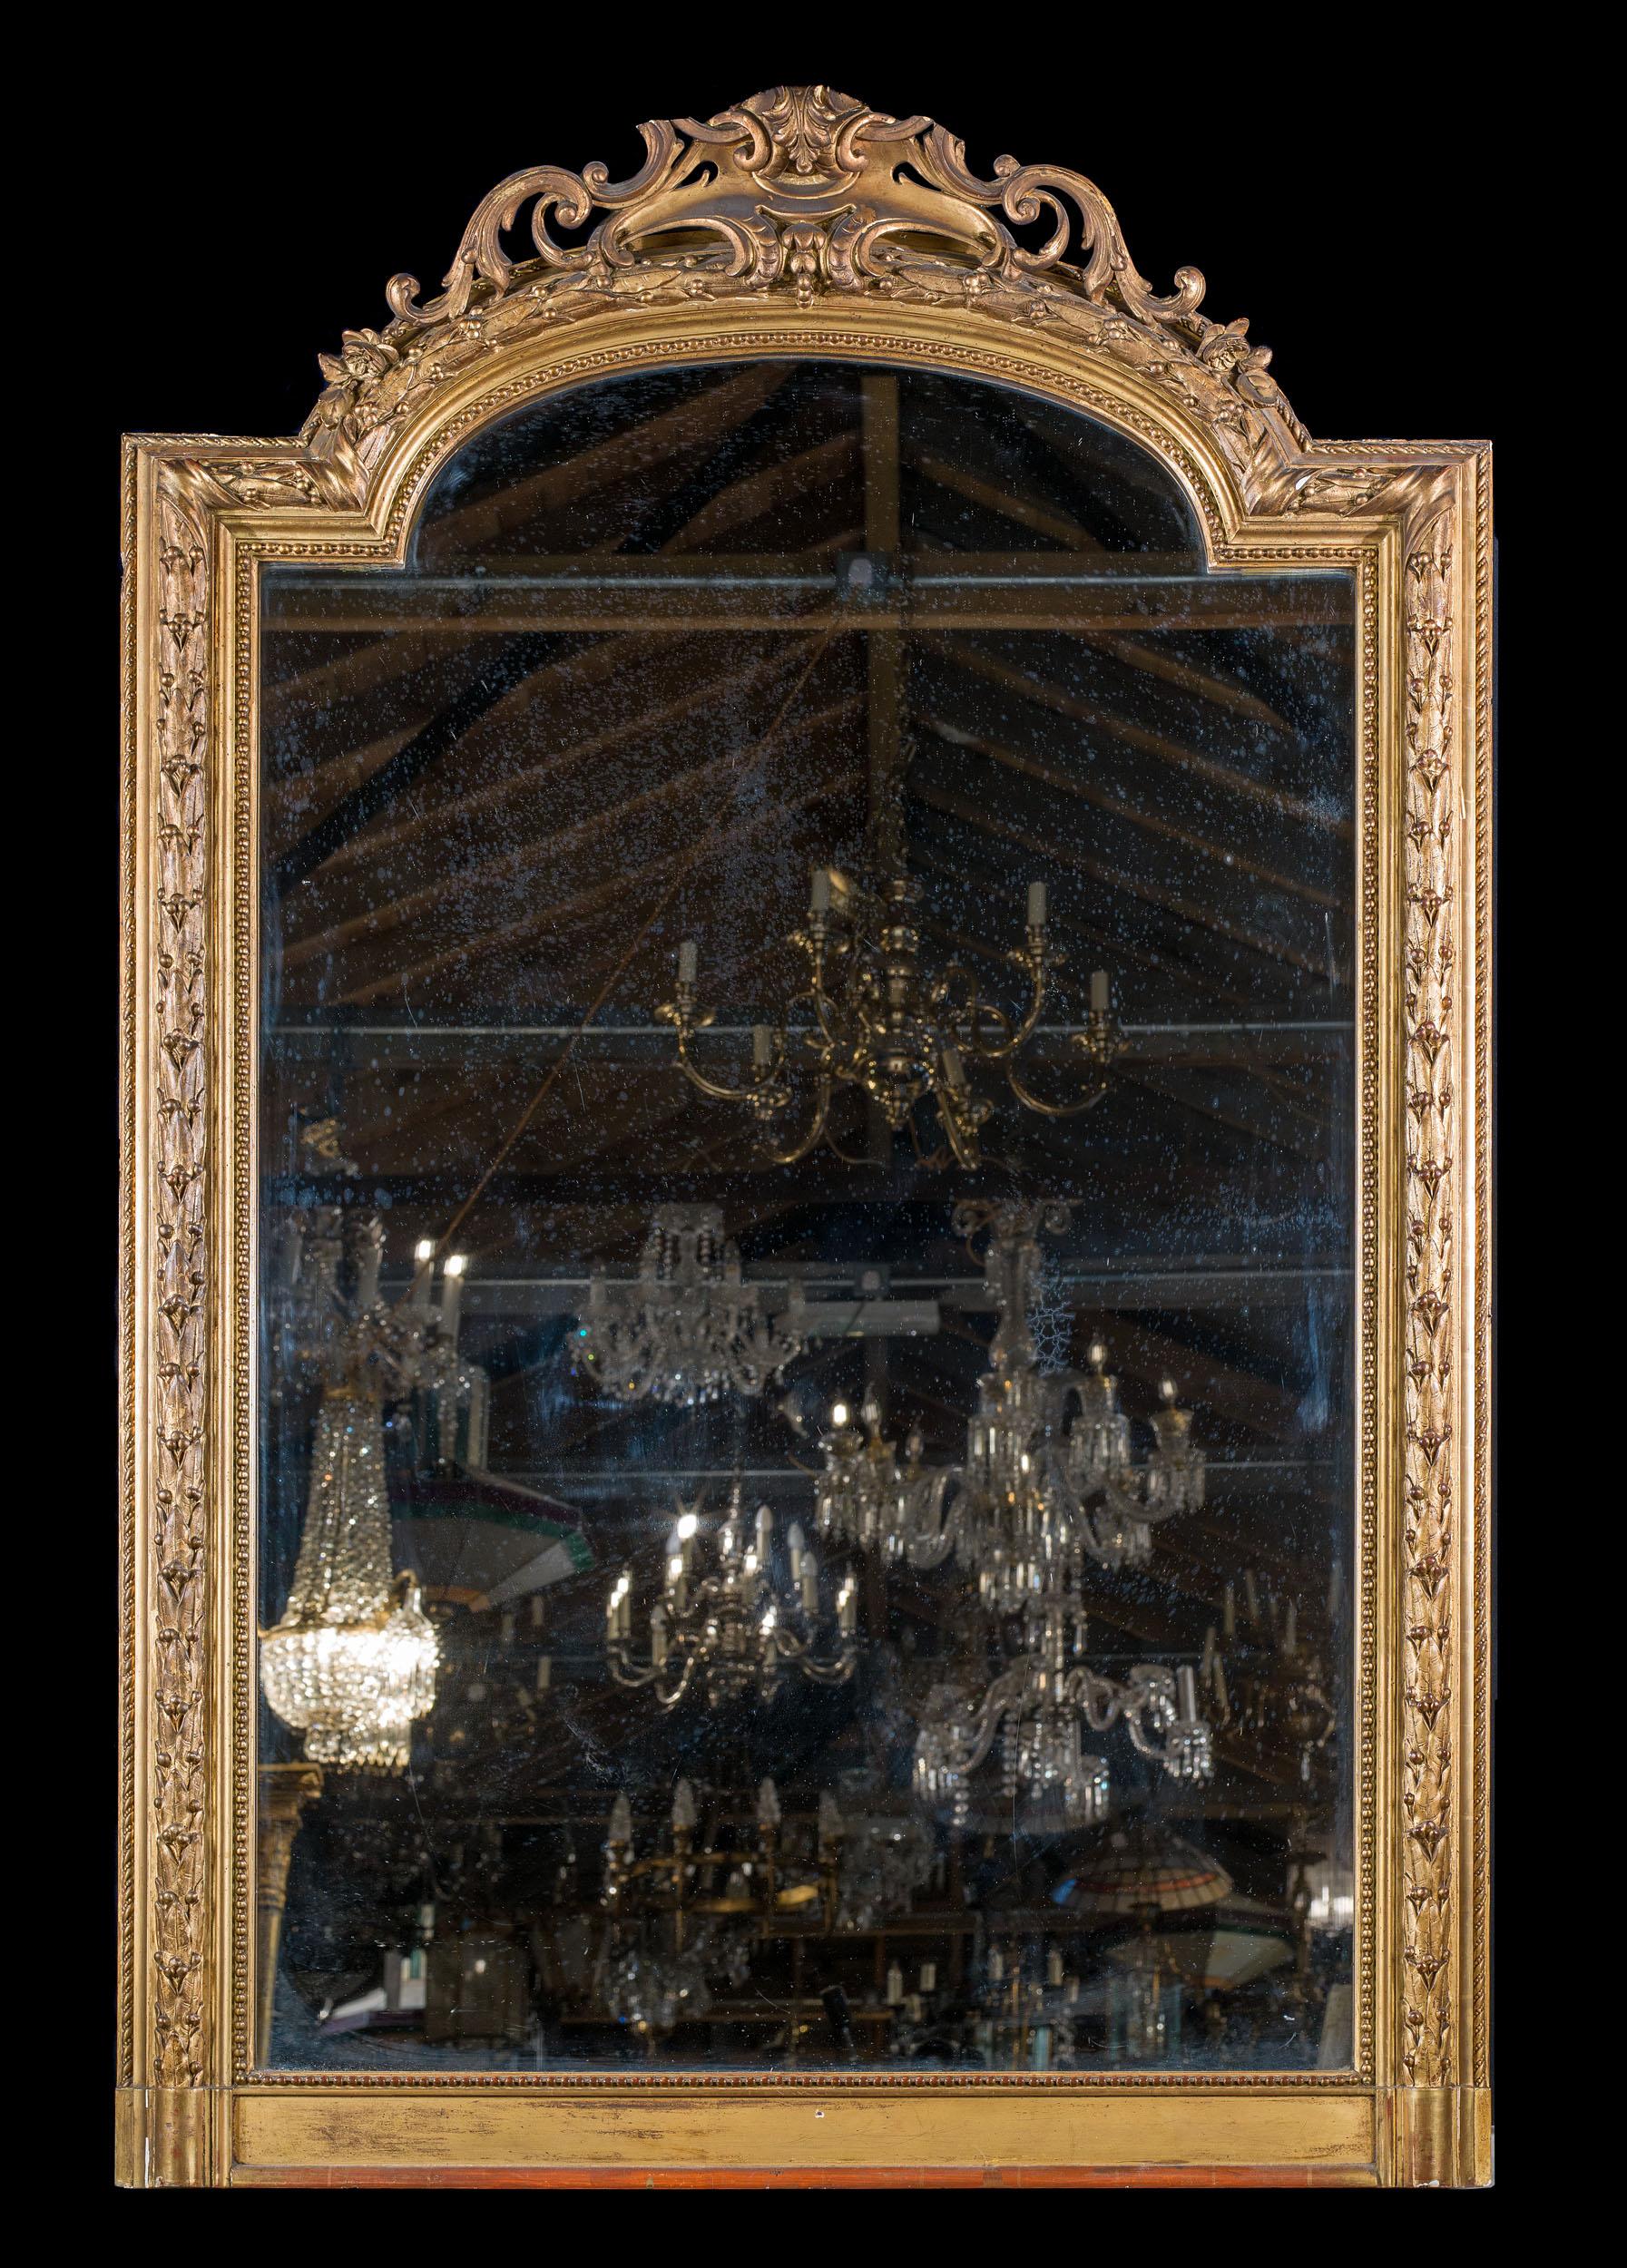 A large French overmantel gilt gesso mirror with an arched scroll pediment. The frame is decorated with bound laurel and rope twist mouldings, edged with fine beading. There is a fragment of a manufacturer's label to the verso, which dates the